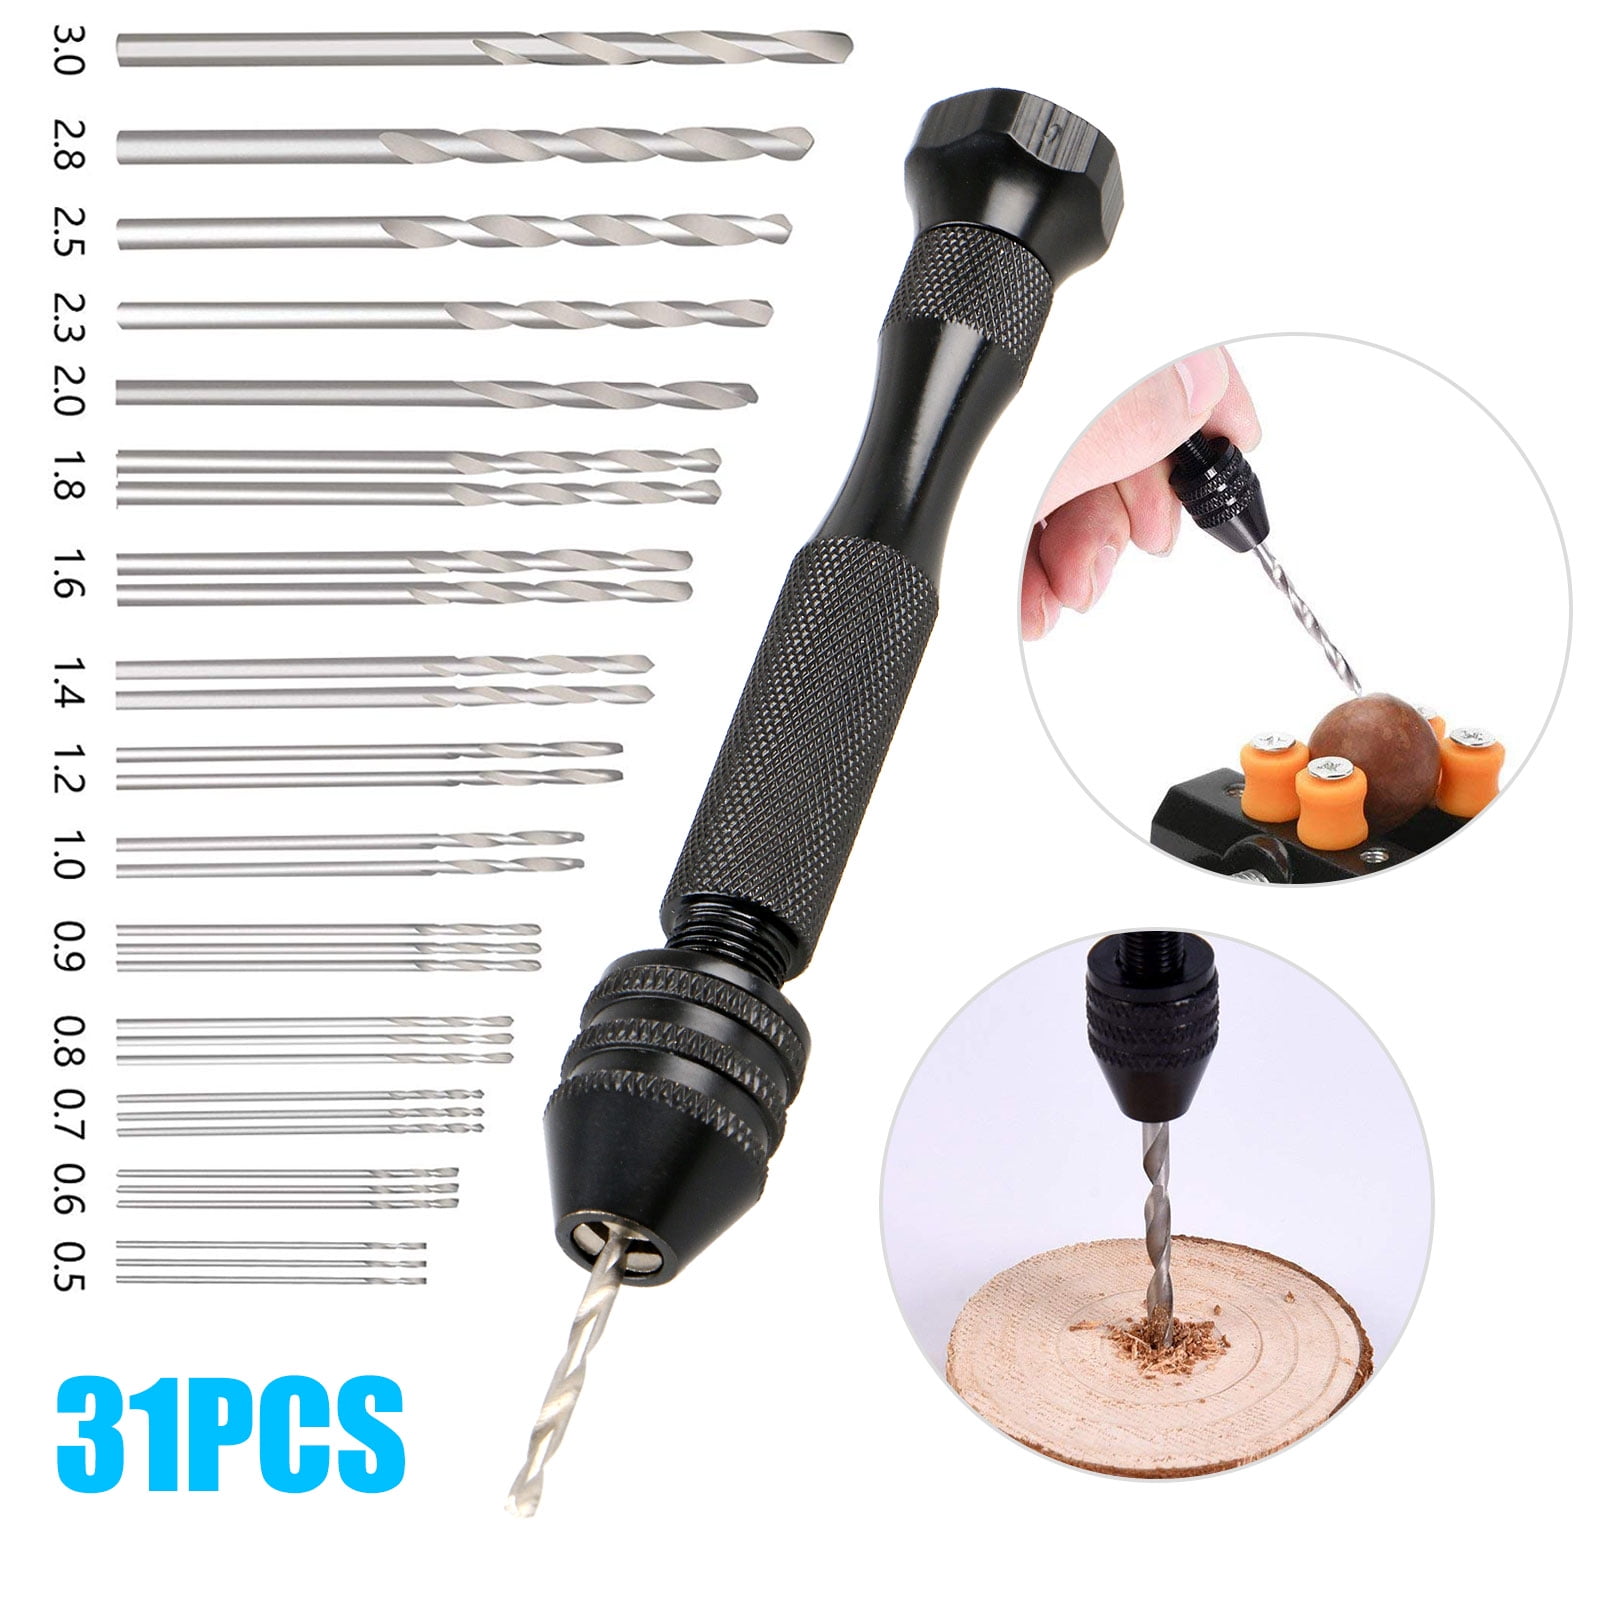 Drill,Aluminum Alloy Large Chuck Hand Twisted Drill Woodworking Drill with 1.5-10mm Clamping Range